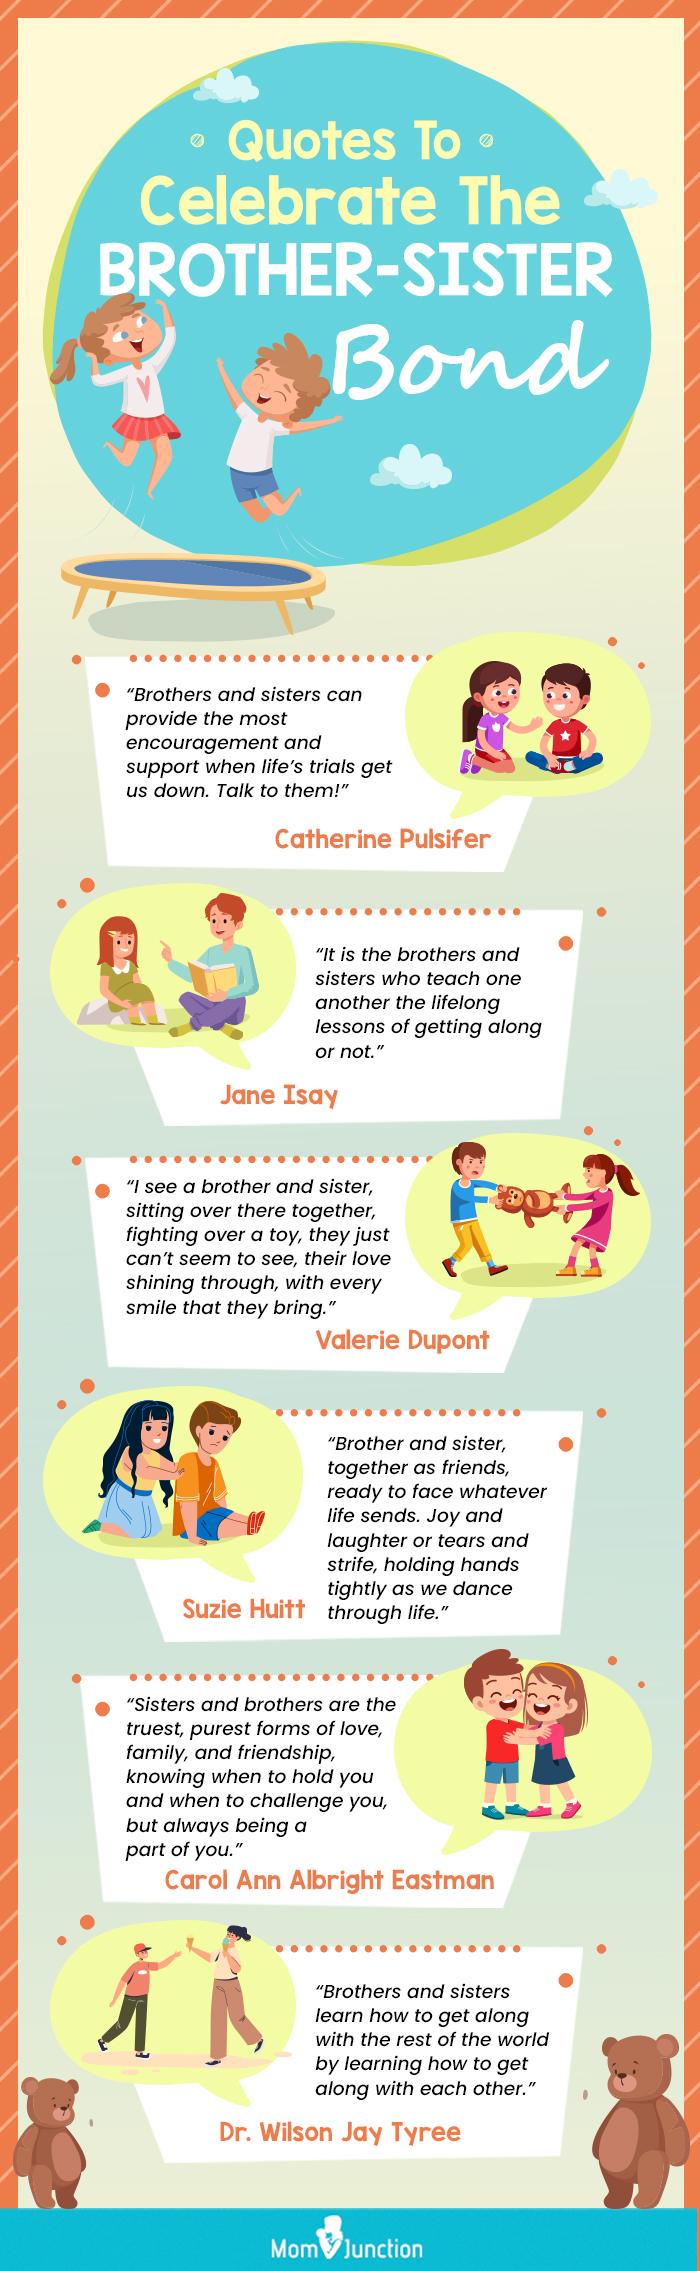 quotes to celebrate the brother sister bond (infographic)